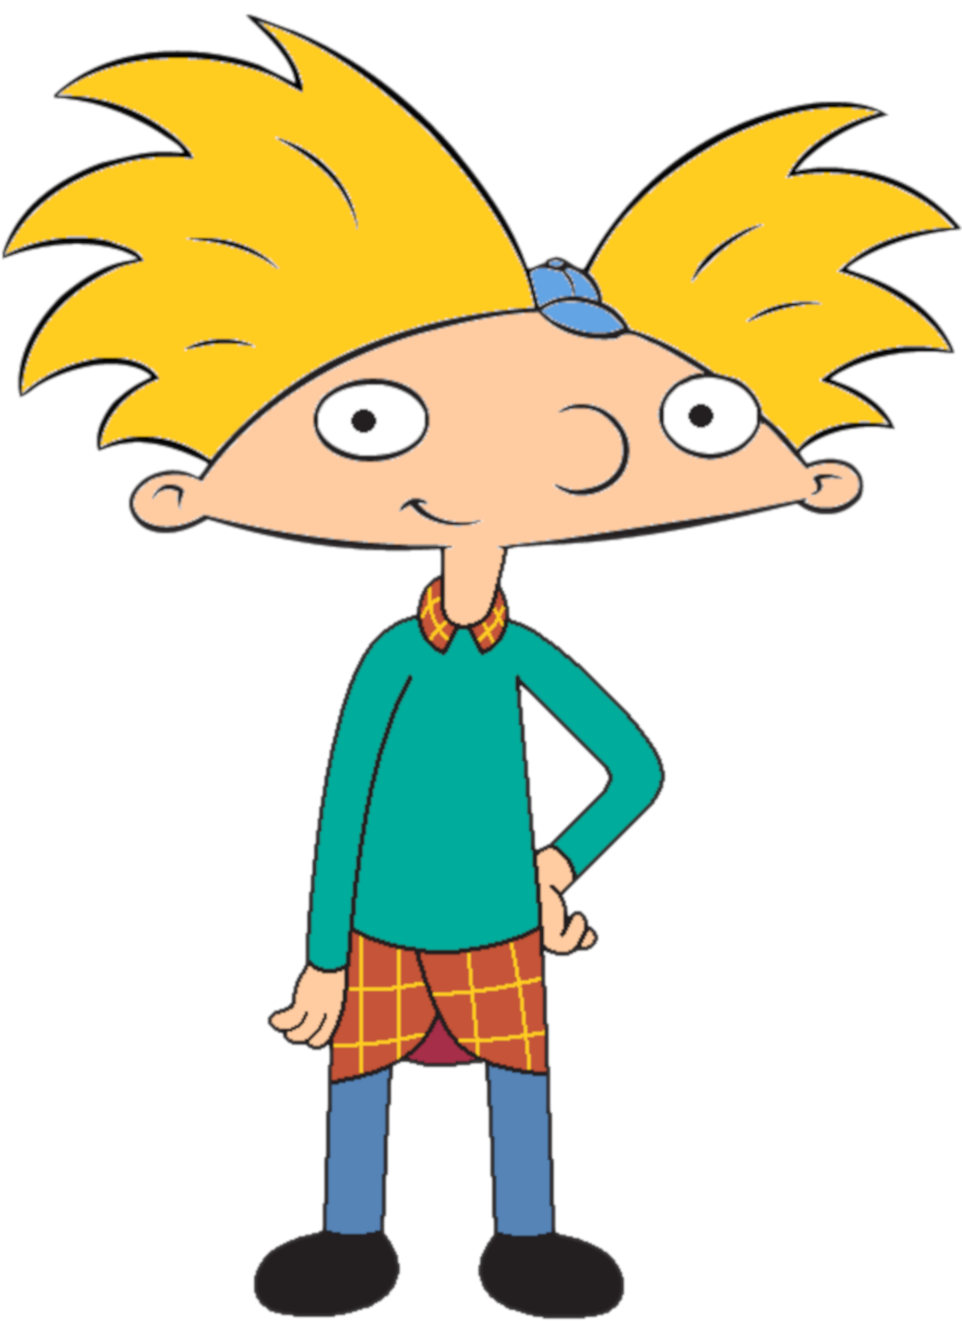 Check out this transparent Hey Arnold smiling PNG image